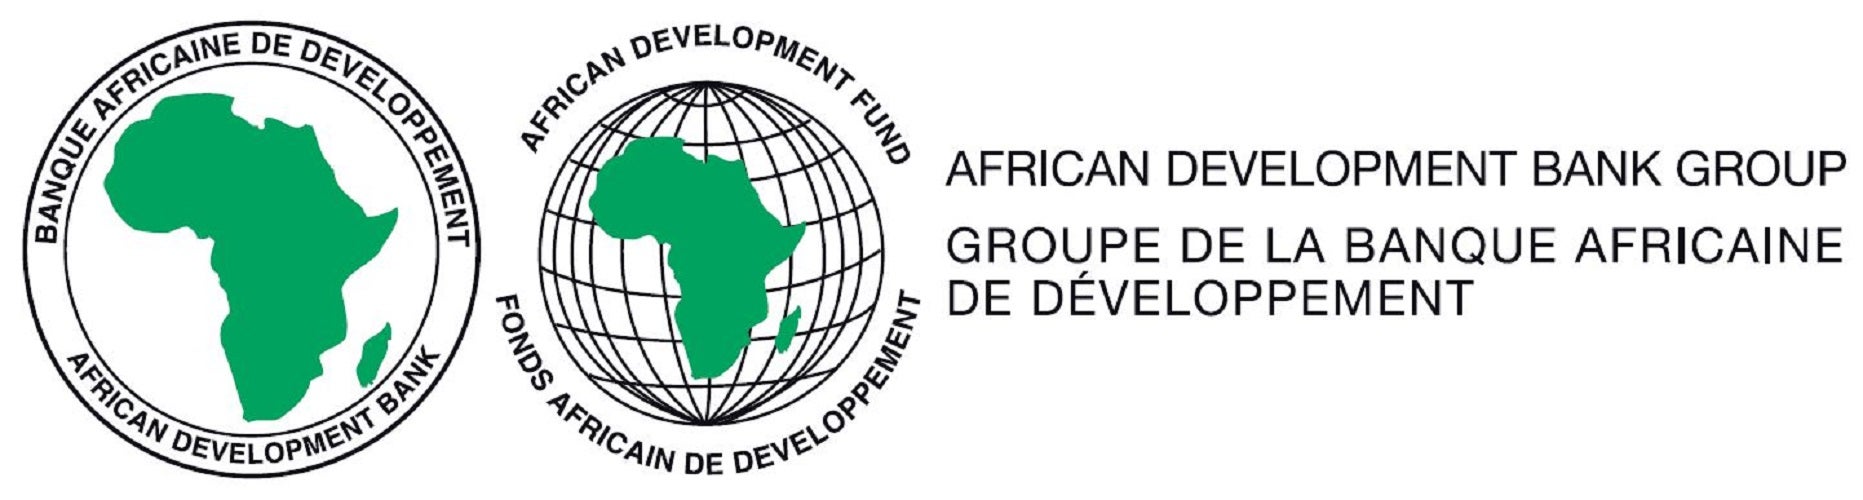 African Development Fund extends $27.39 million grant to support development of mini grid and solar PV net metering in Ghana